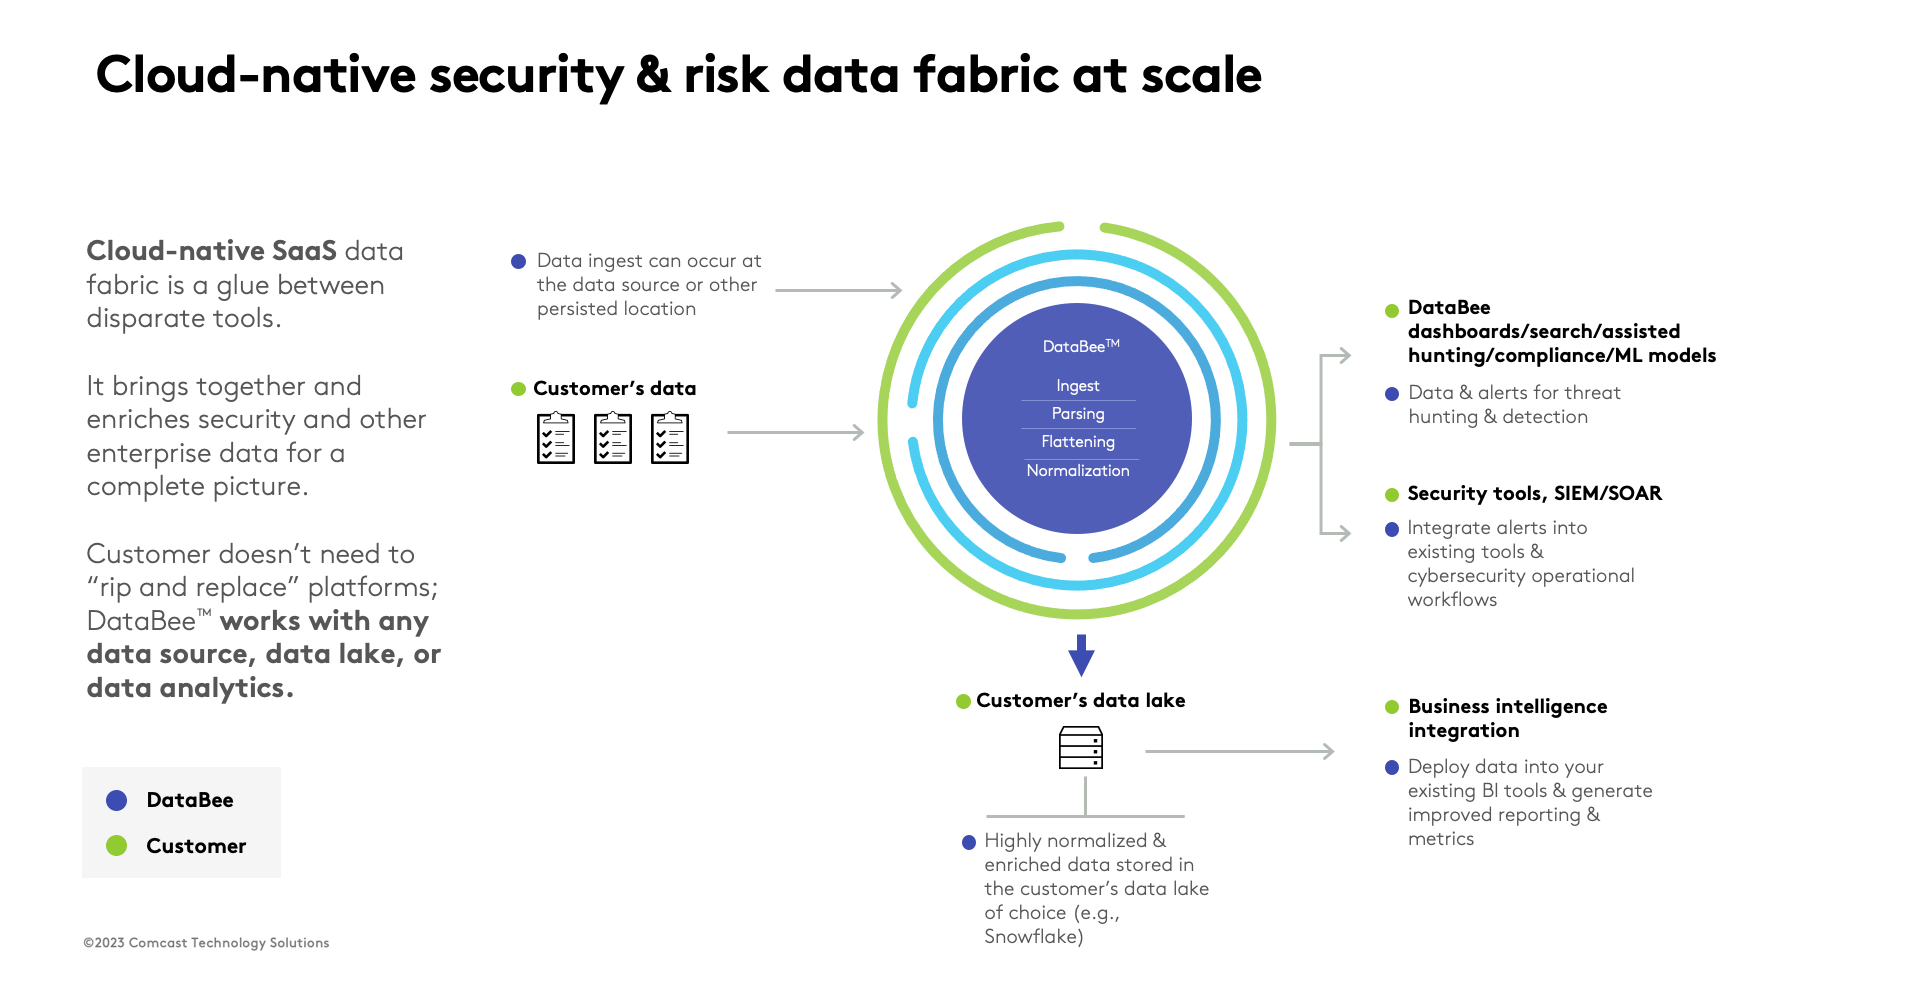 Cloud-native based security & risk data fabric at scale